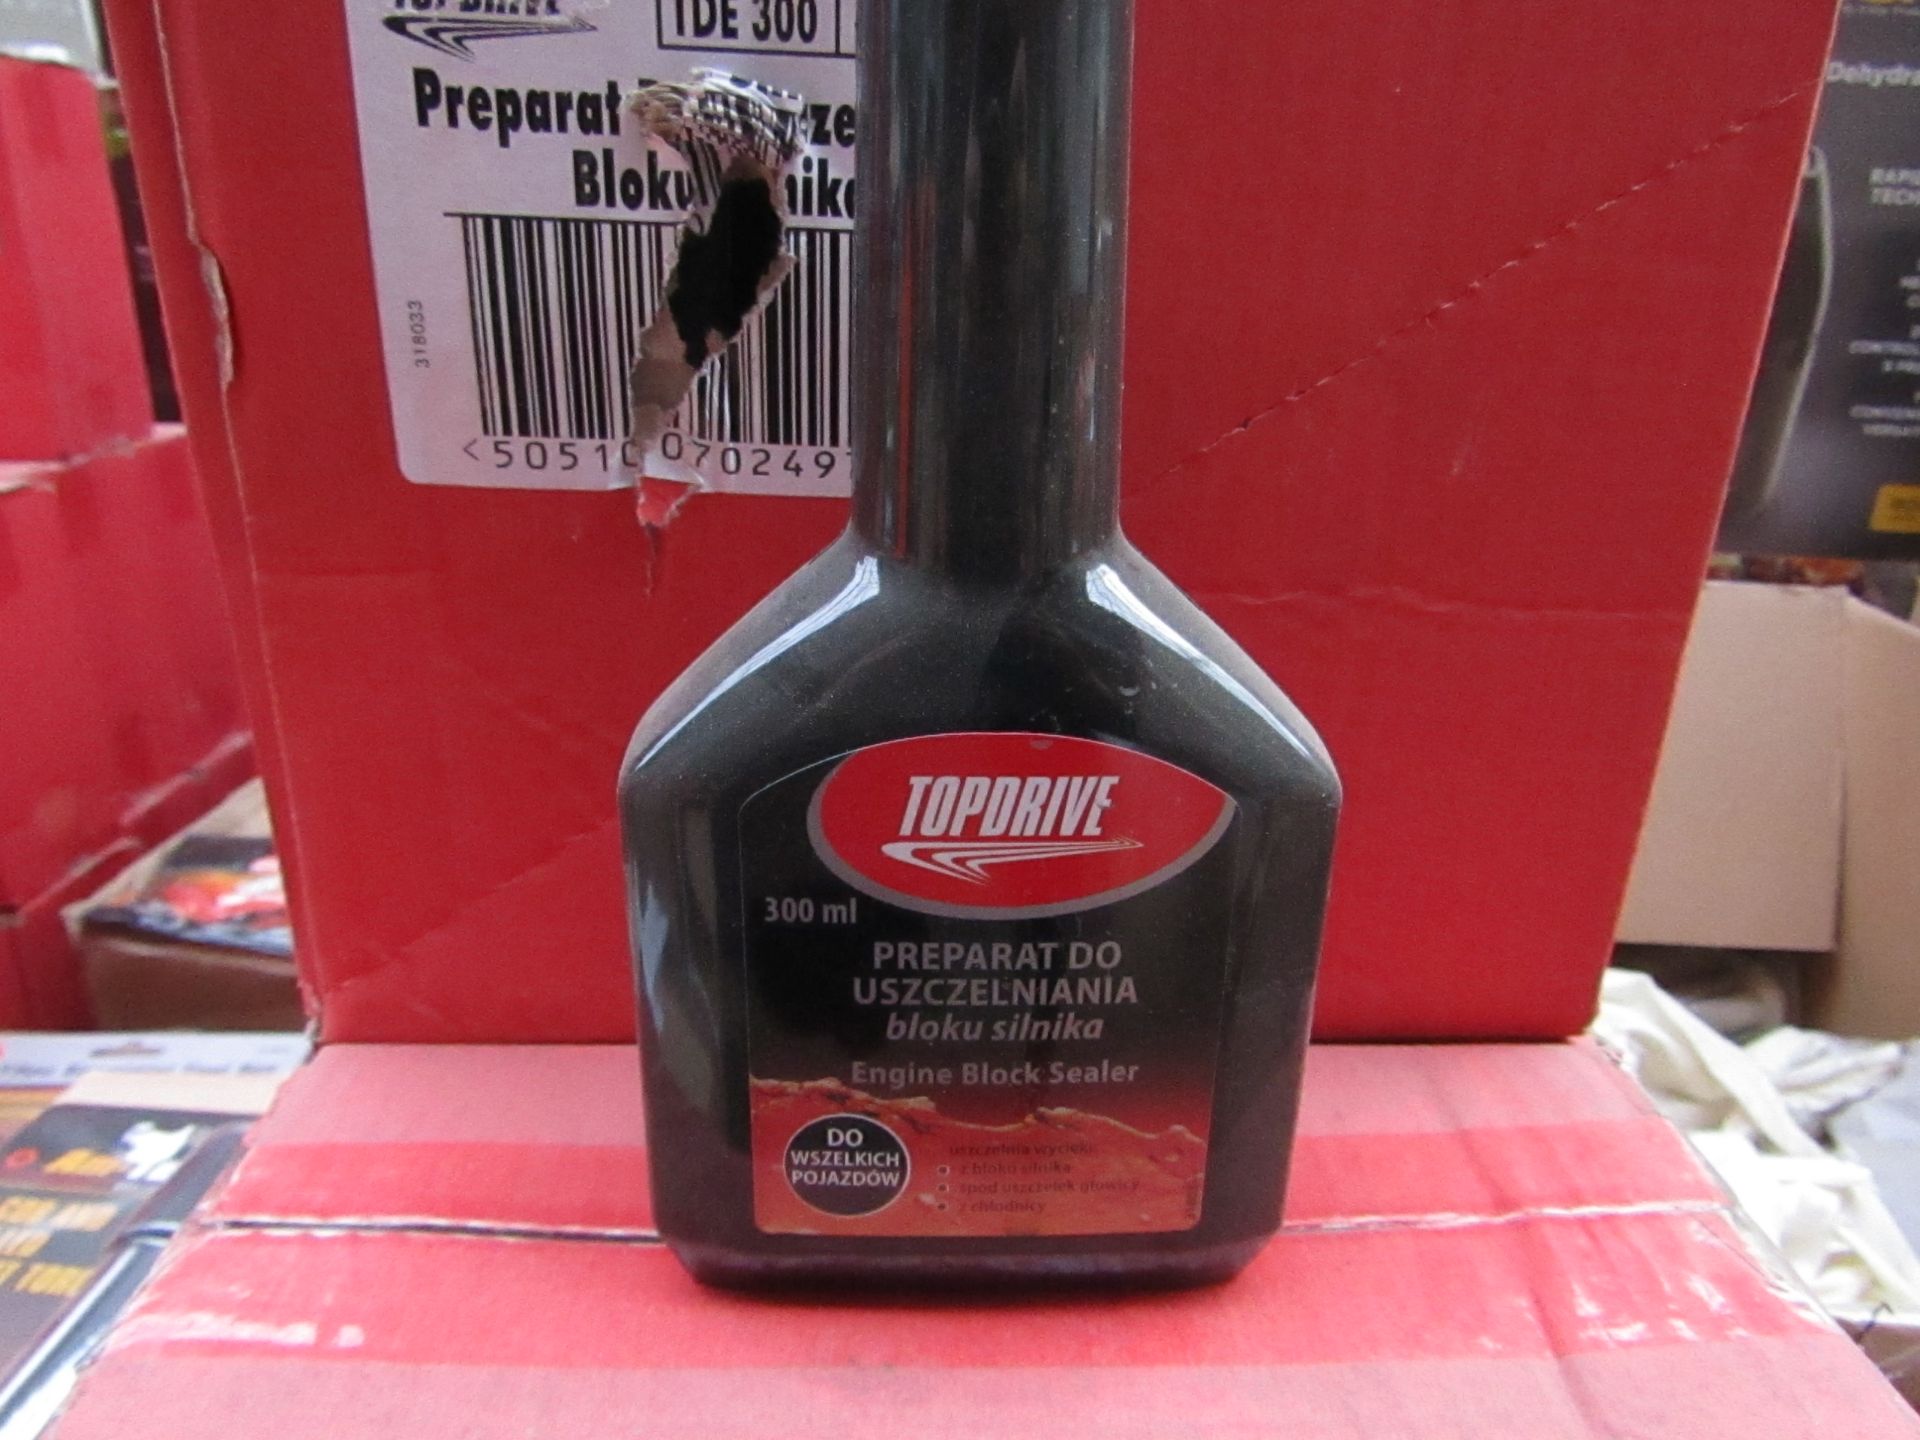 6x 300ml Bottles of Top Drive engine block sealer - New & Boxed.